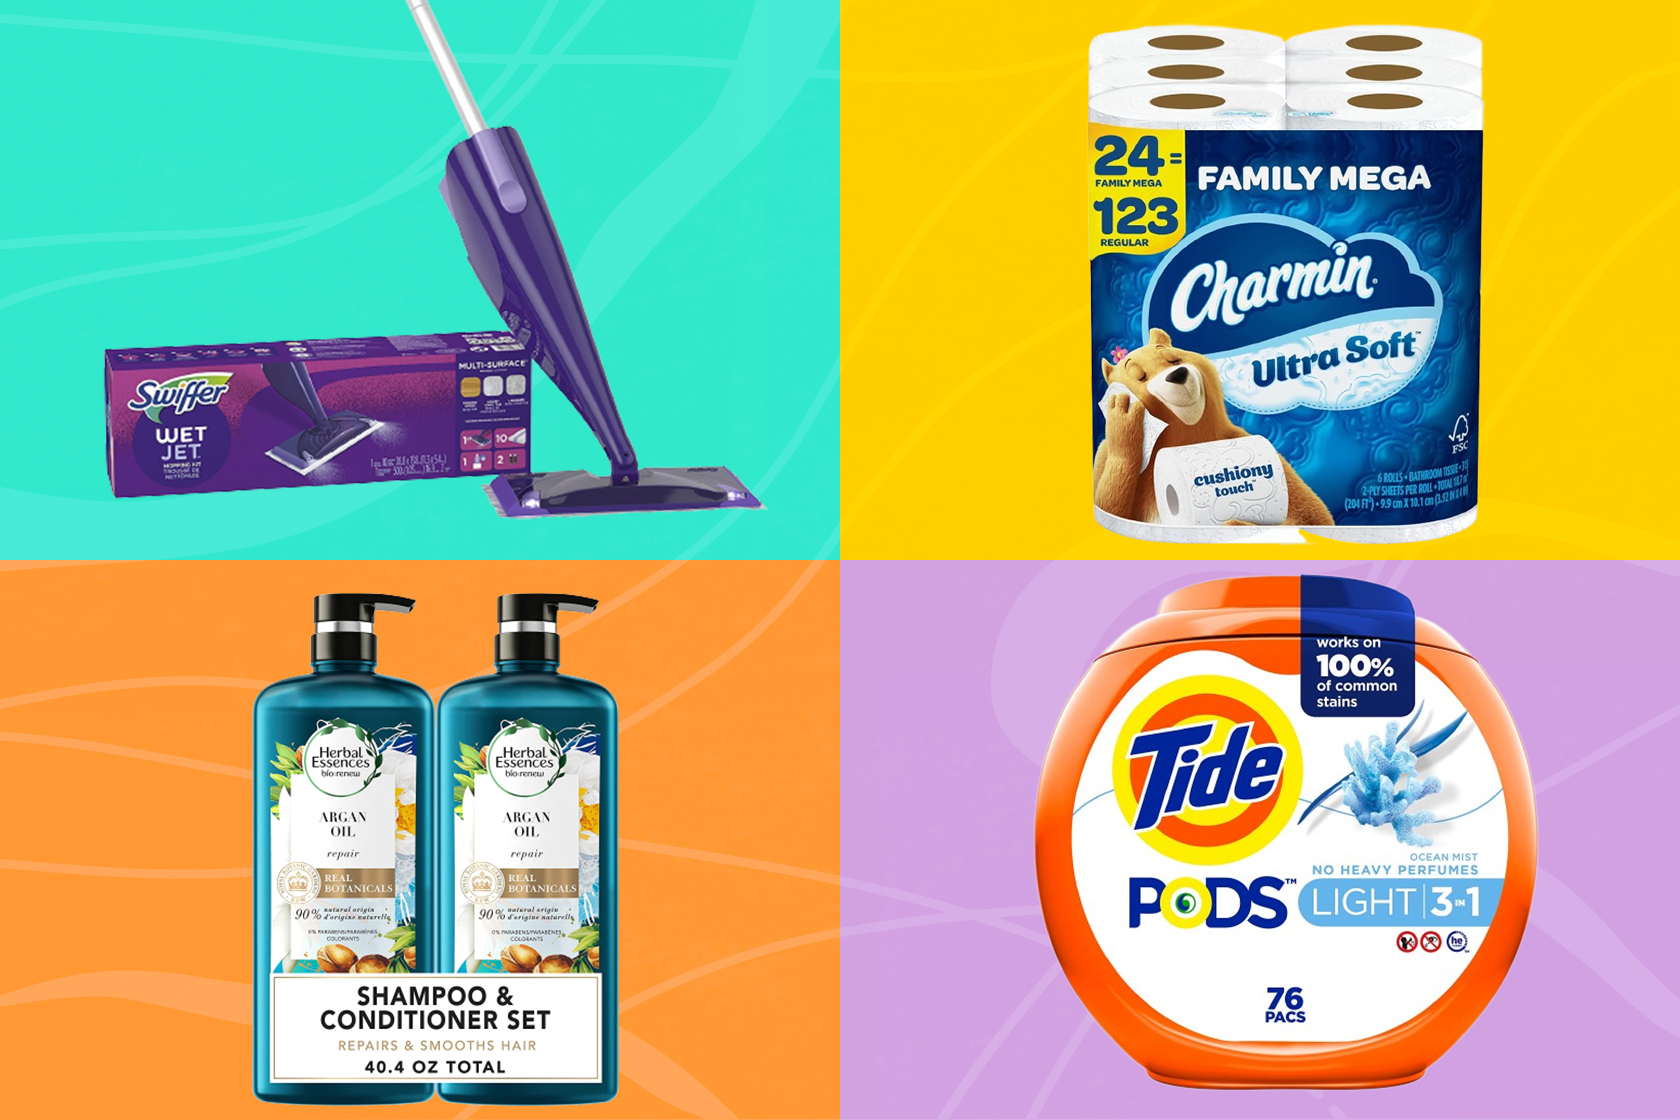  Get $20 Credit w/ $80+ P&G Products Purchase